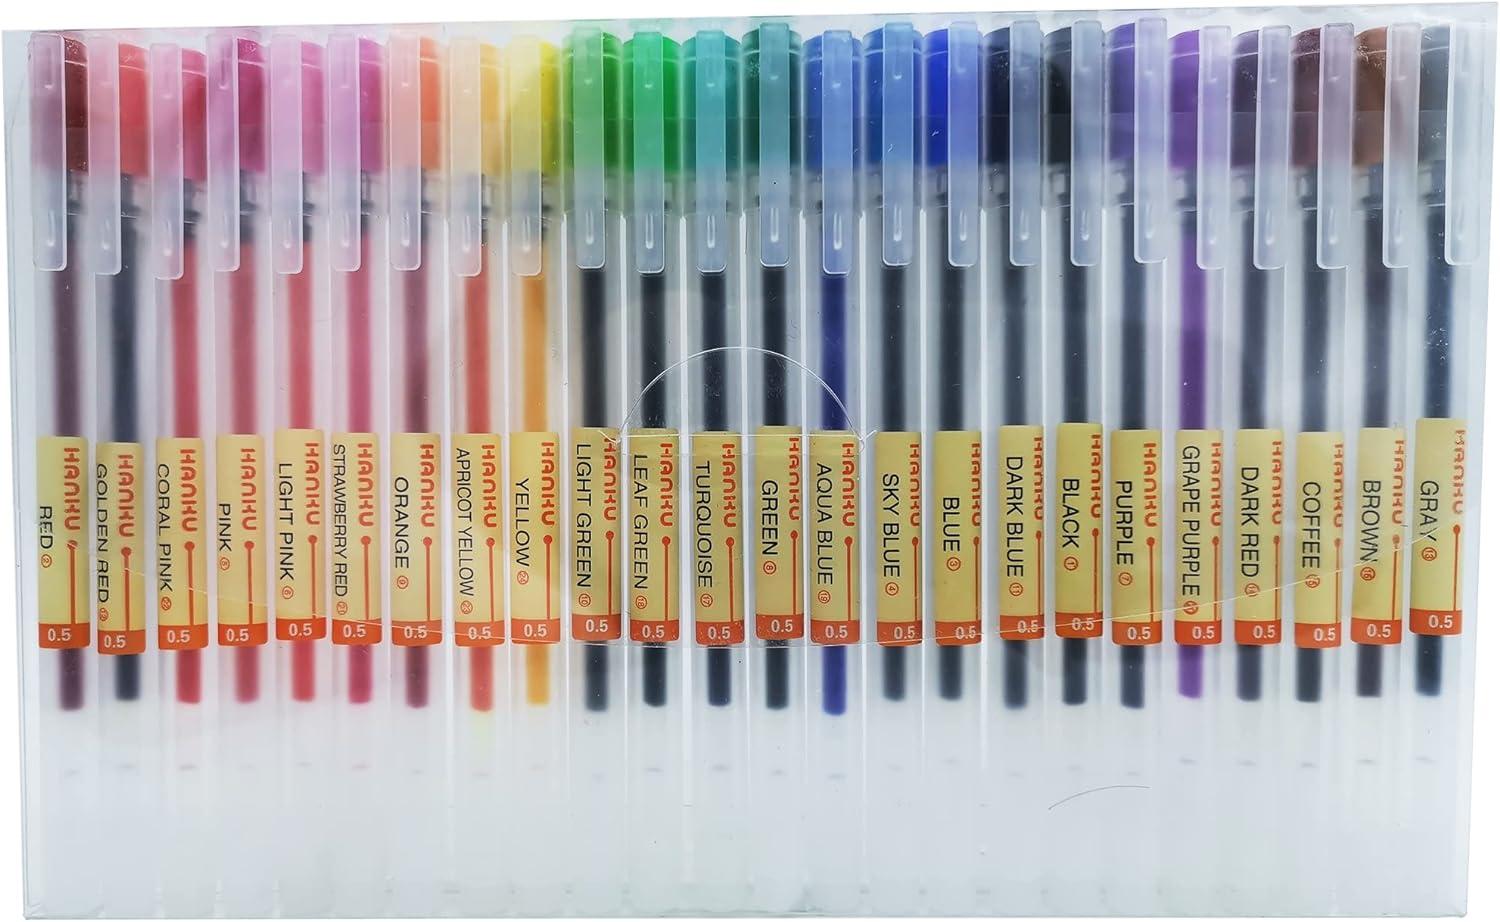 ?beiwo premium gel ink ball point pen 0.5mm fine point 24 color pens  ?beiwo